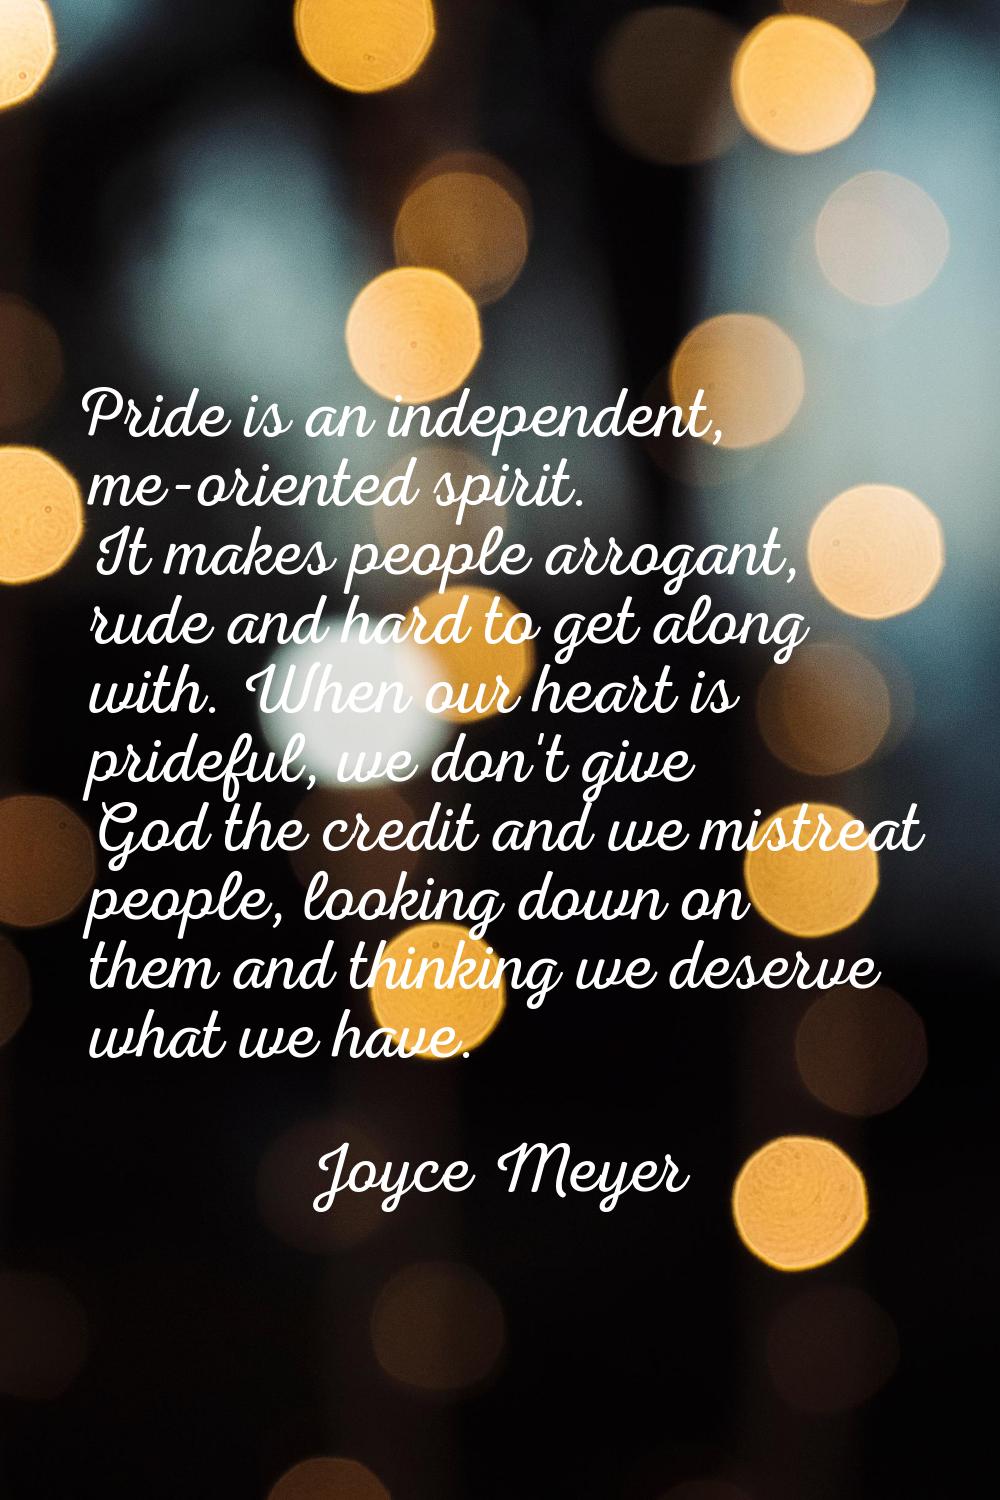 Pride is an independent, me-oriented spirit. It makes people arrogant, rude and hard to get along w